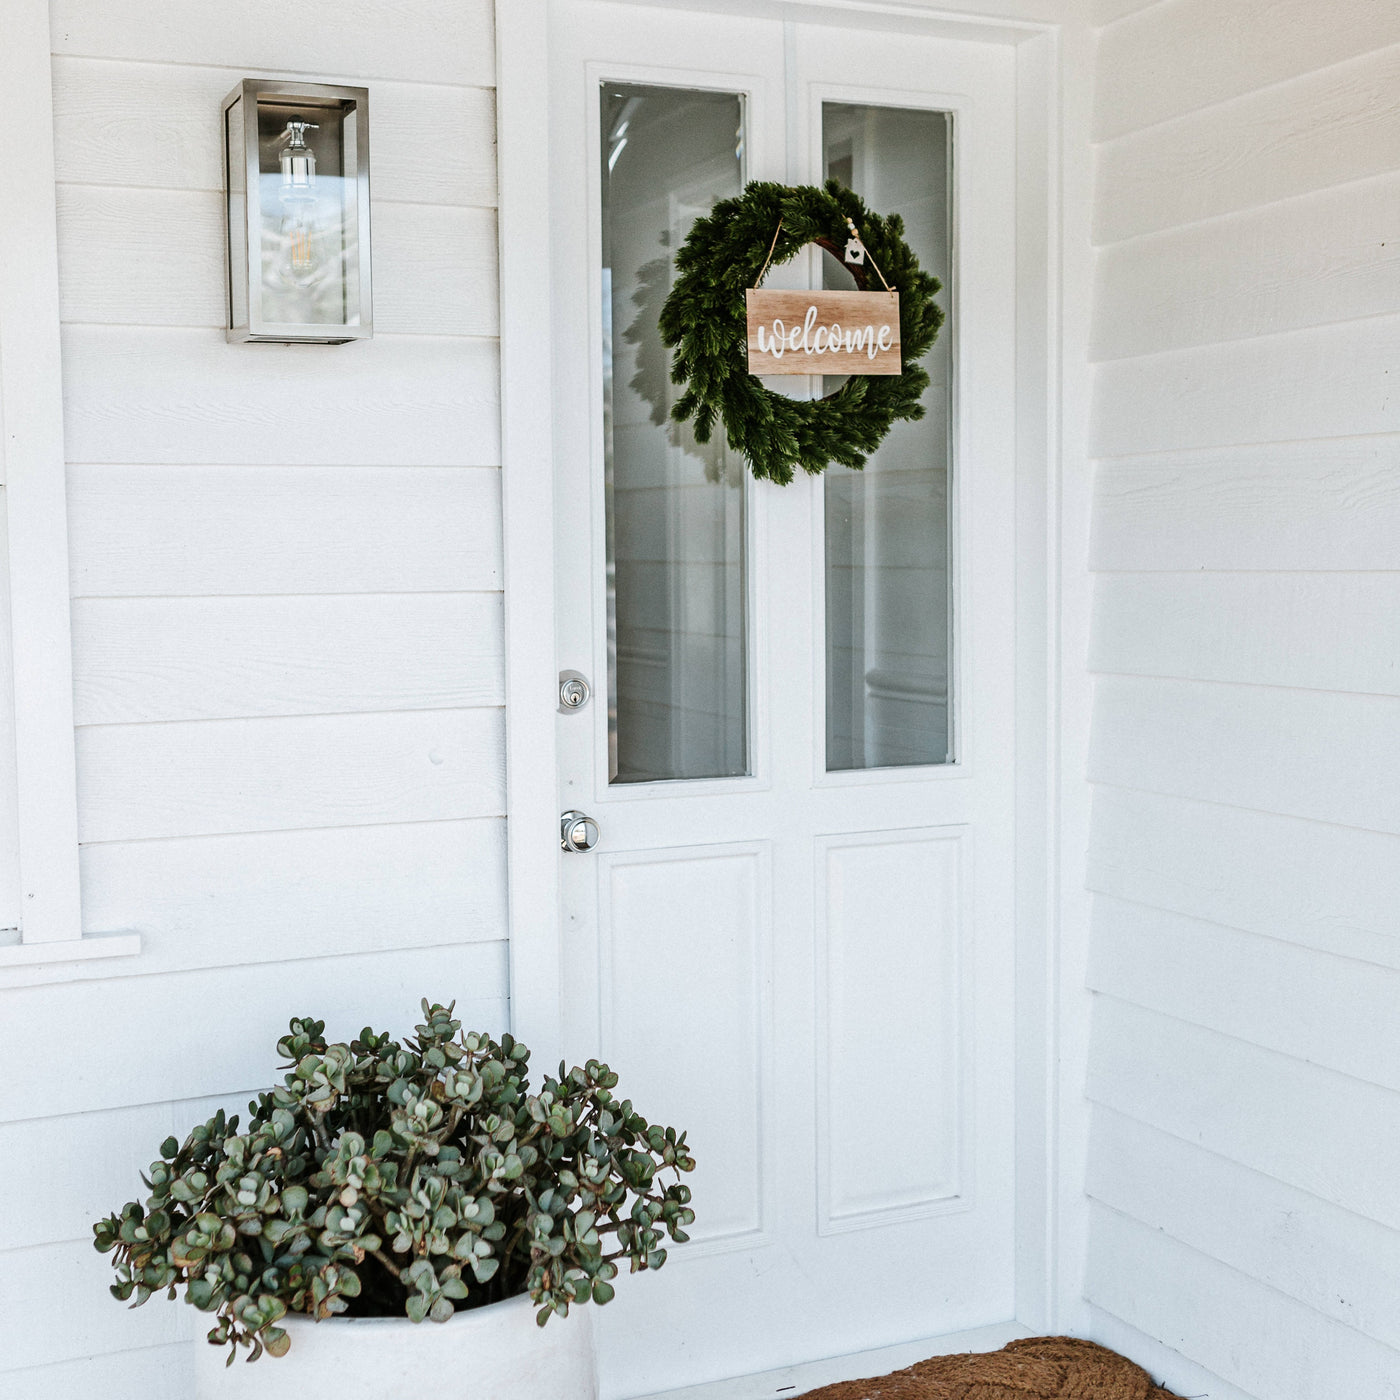 How to Find the Best Display Position for Your Wreath?